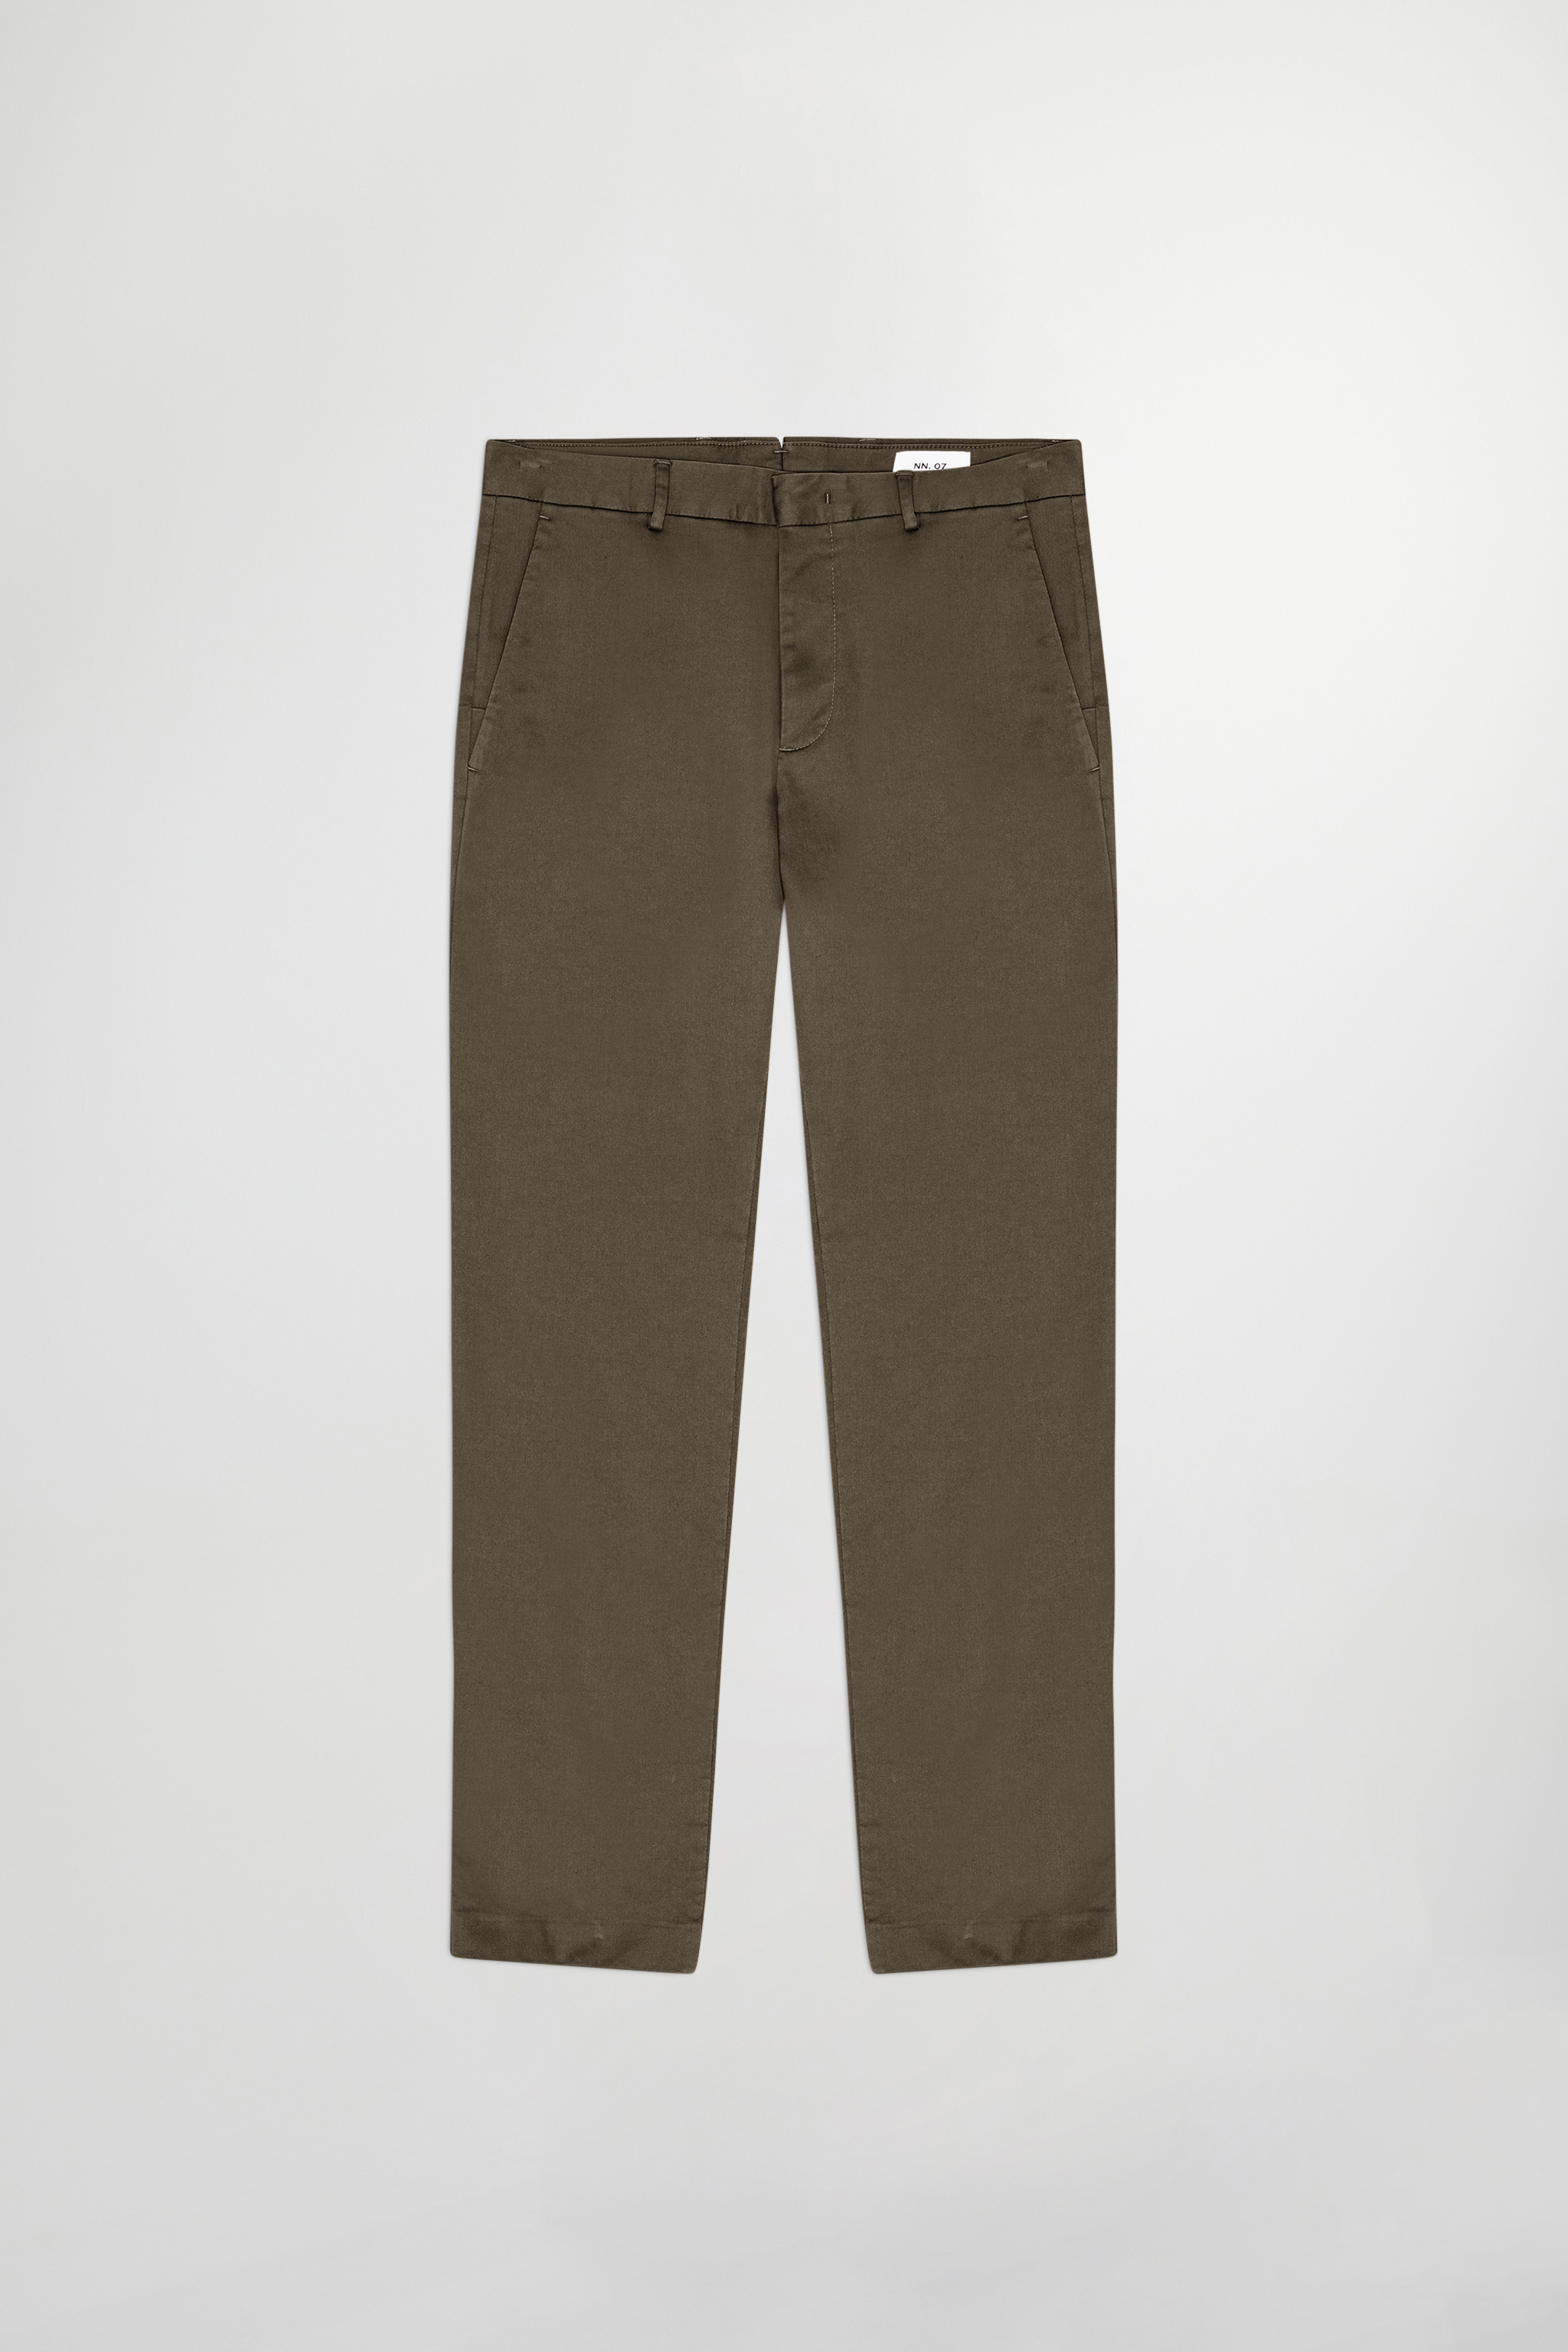 Theo 1229 men's chinos - Blue - Buy online at NN.07®